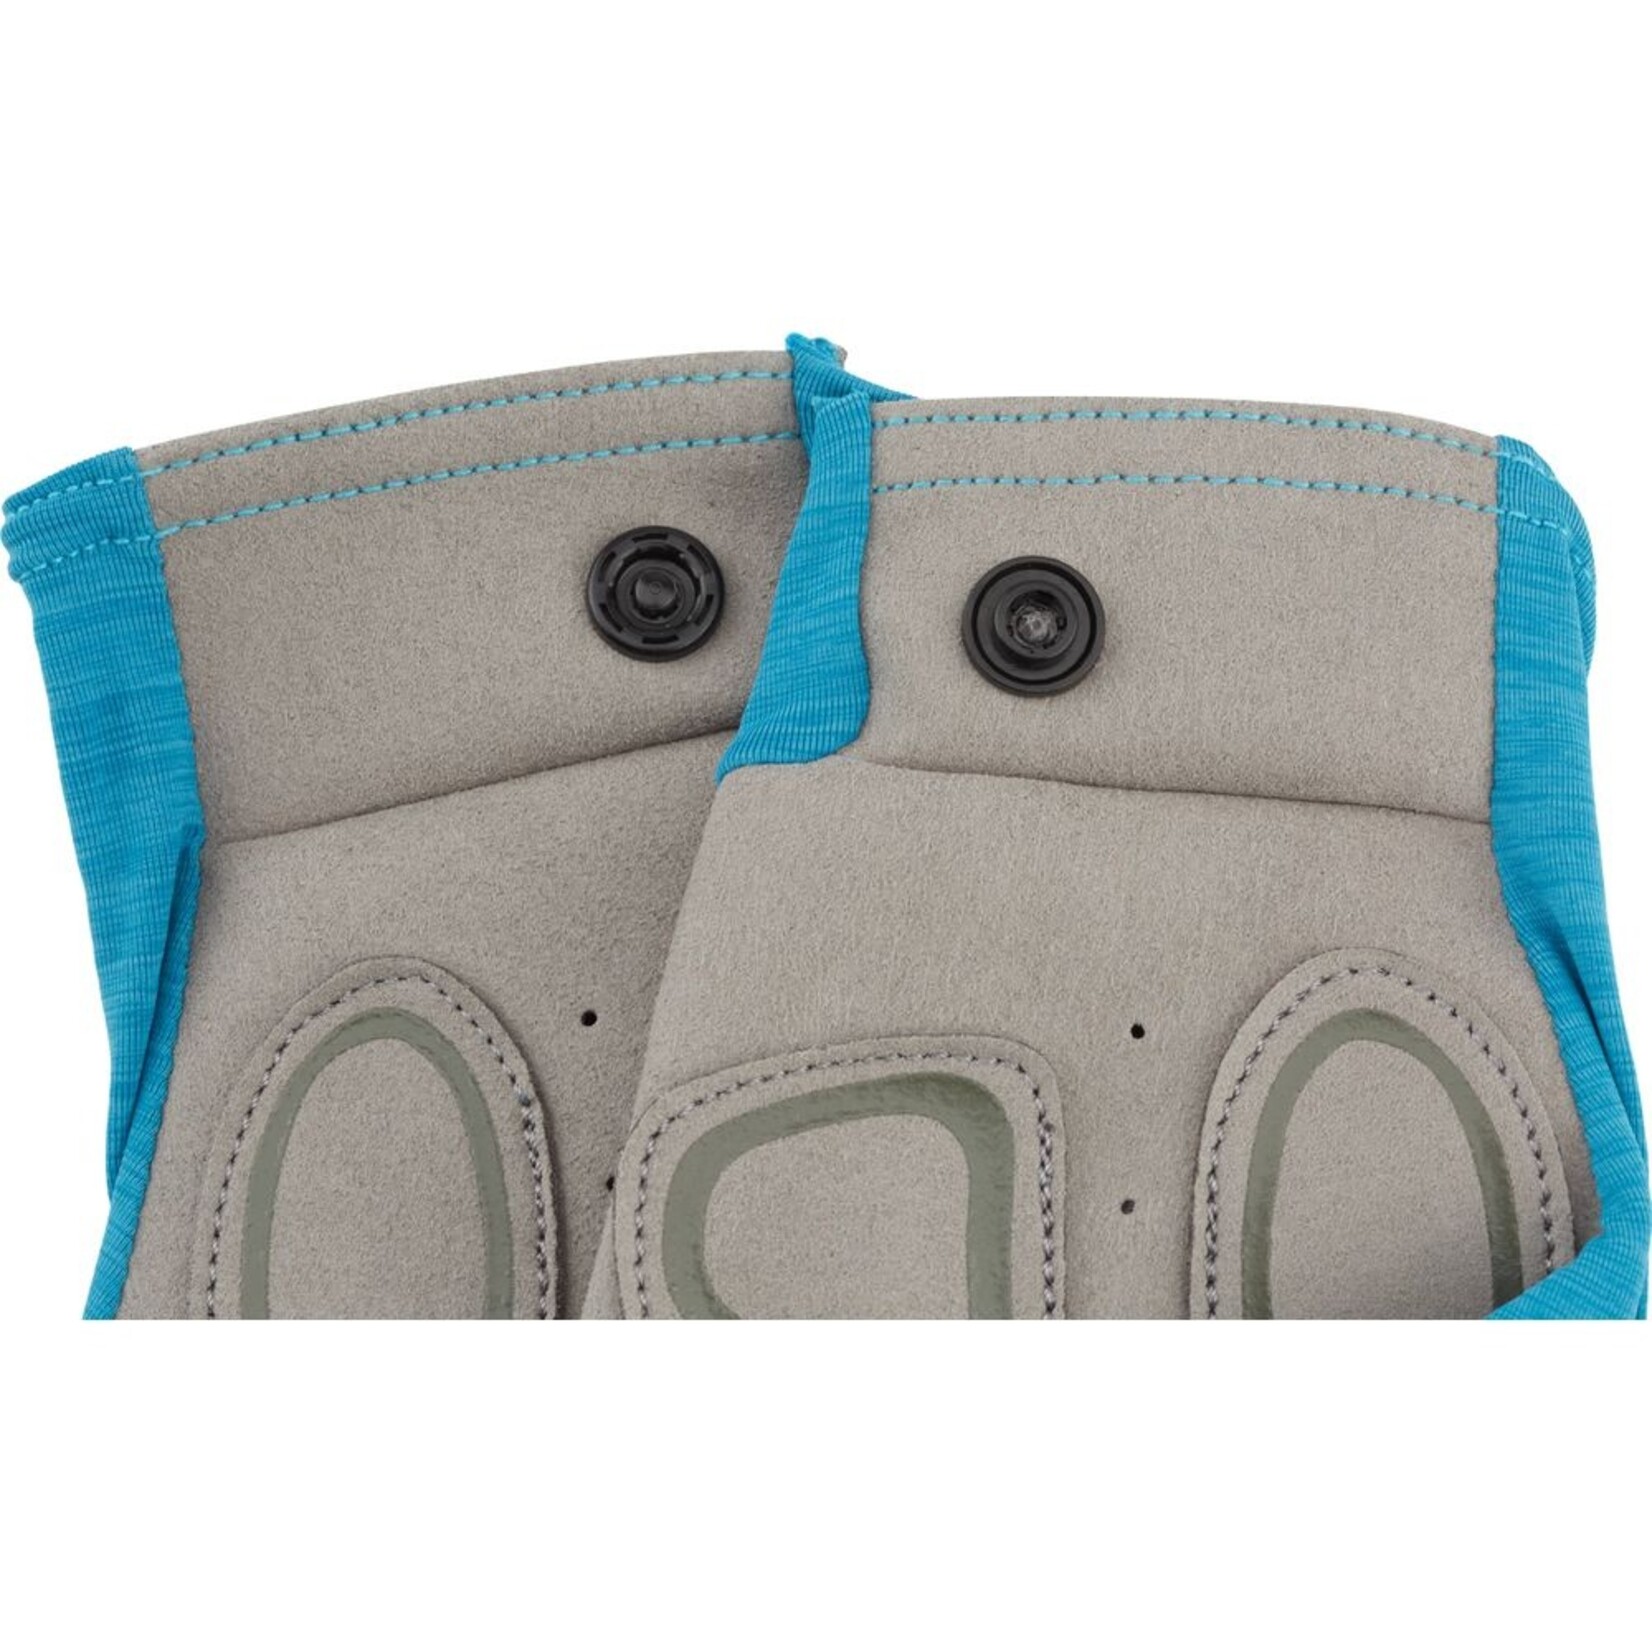 NRS NRS Women's Boater's Gloves **Closeout**